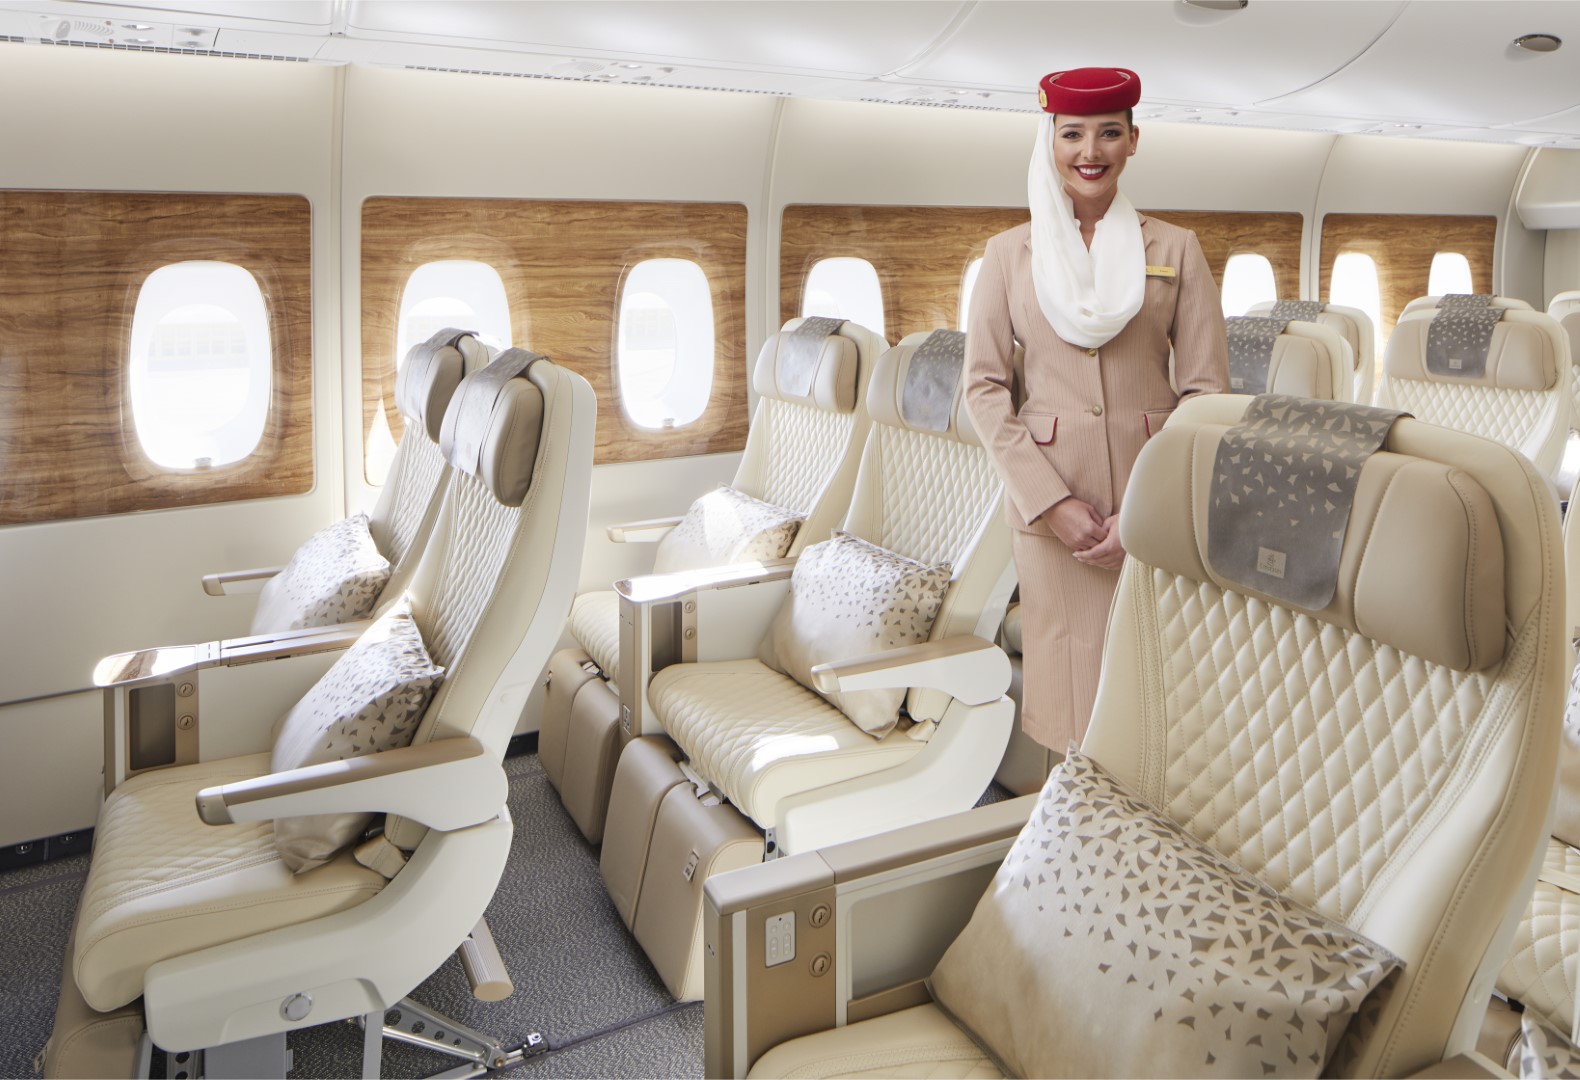 Emirates takes A380 experience to new heights, unveils Premium Economy plus enhancements across all cabins